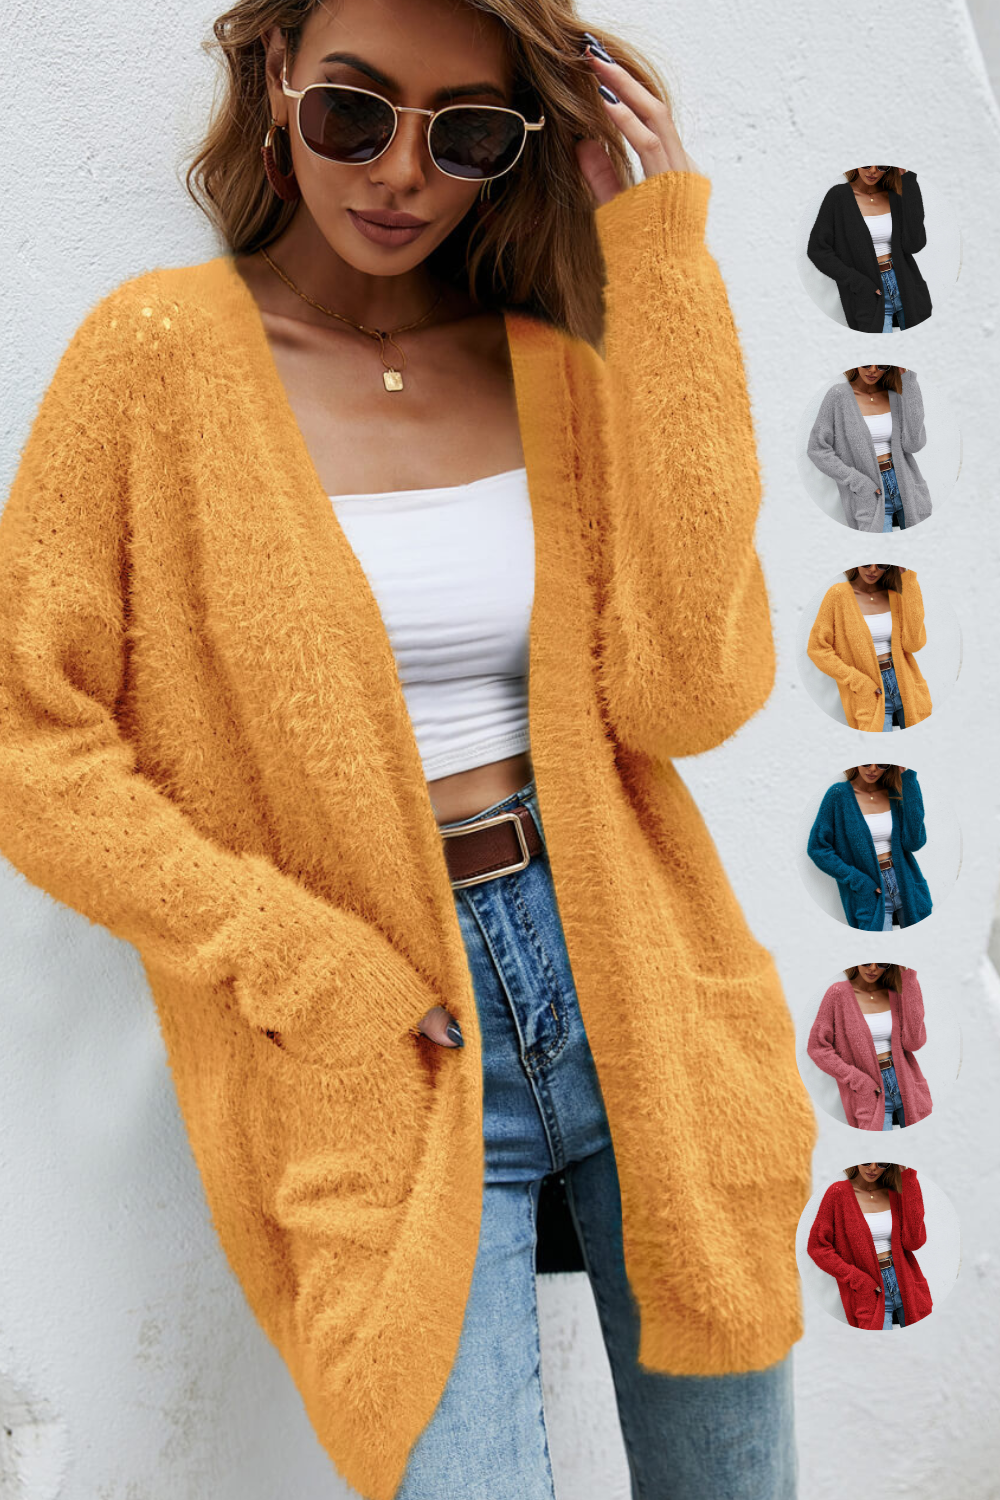 Fuzzy Cardigan with Pockets Super Soft Stretchy, Dropped Shoulders, ultra soft & stretchy knit acrylic/polyamide | teal , yellow, black, pink, grey gray, red